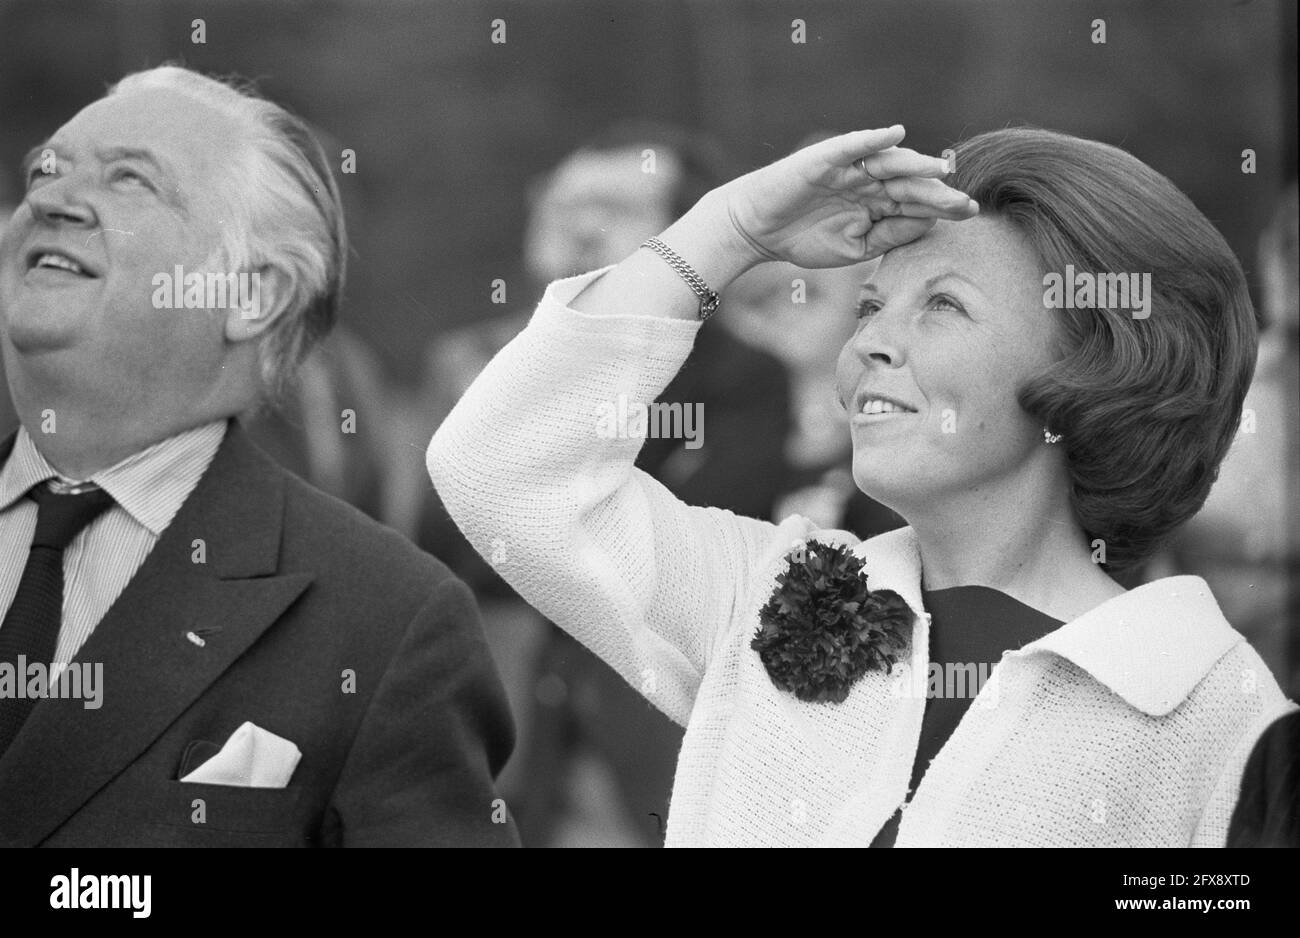 Visit of princess Beatrix to Papendal, Beatrix watches skydiving demonstration now together with Lord Killami (president IOC), May 21, 1976, PARACHUTES, visits, demonstrations, princesses, presidents, The Netherlands, 20th century press agency photo, news to remember, documentary, historic photography 1945-1990, visual stories, human history of the Twentieth Century, capturing moments in time Stock Photo